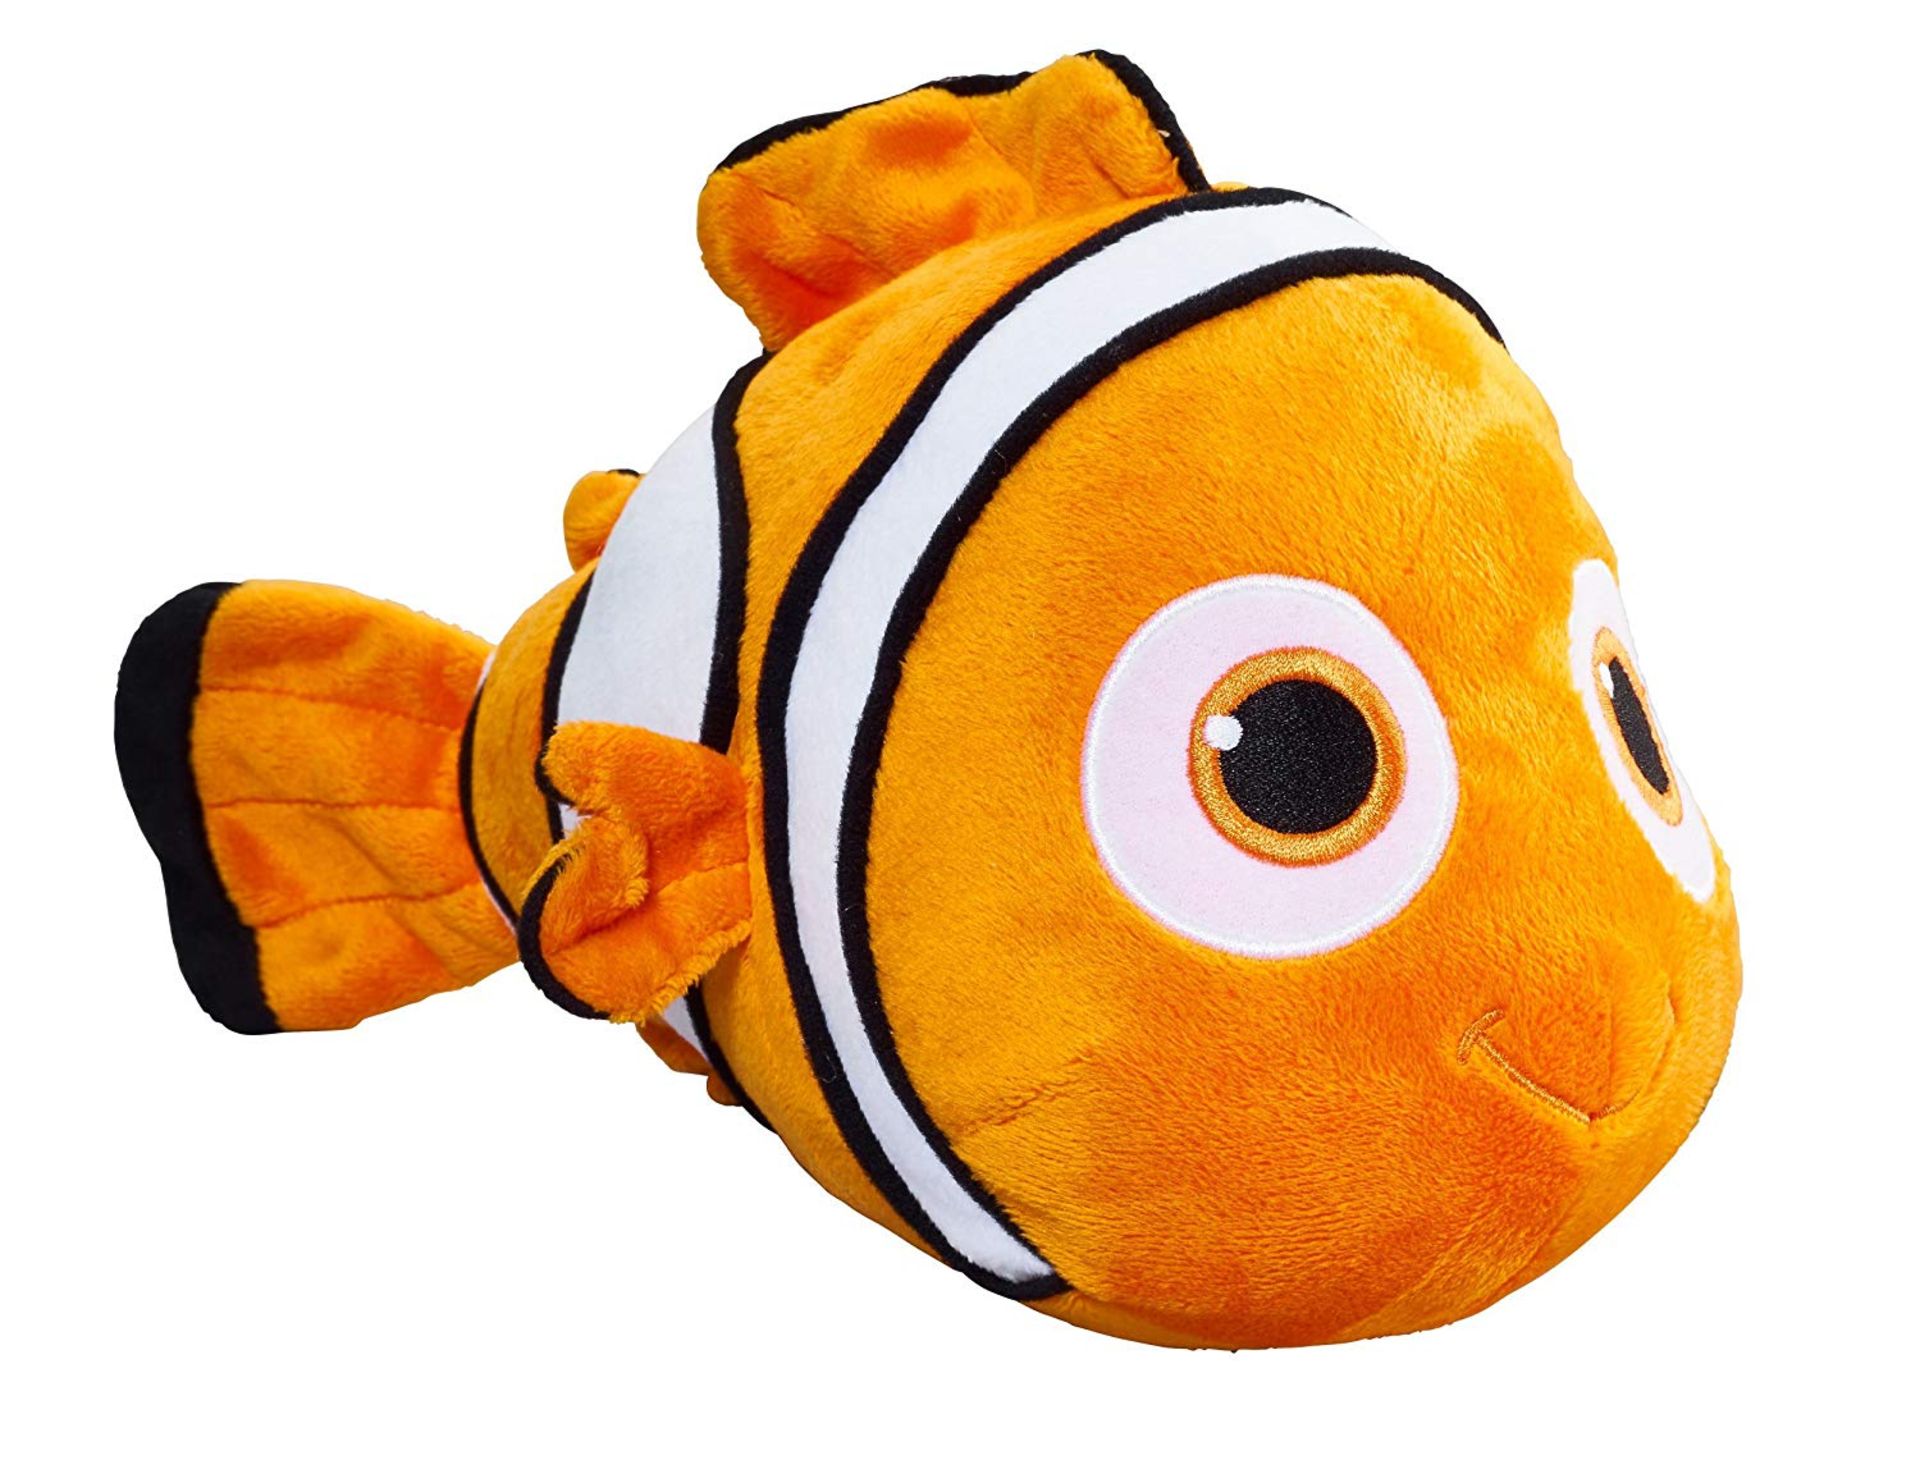 30 x Finding Dory: Nemo "Whispering Waves" Soft Plush Toy- 18m+ RRP £749.7